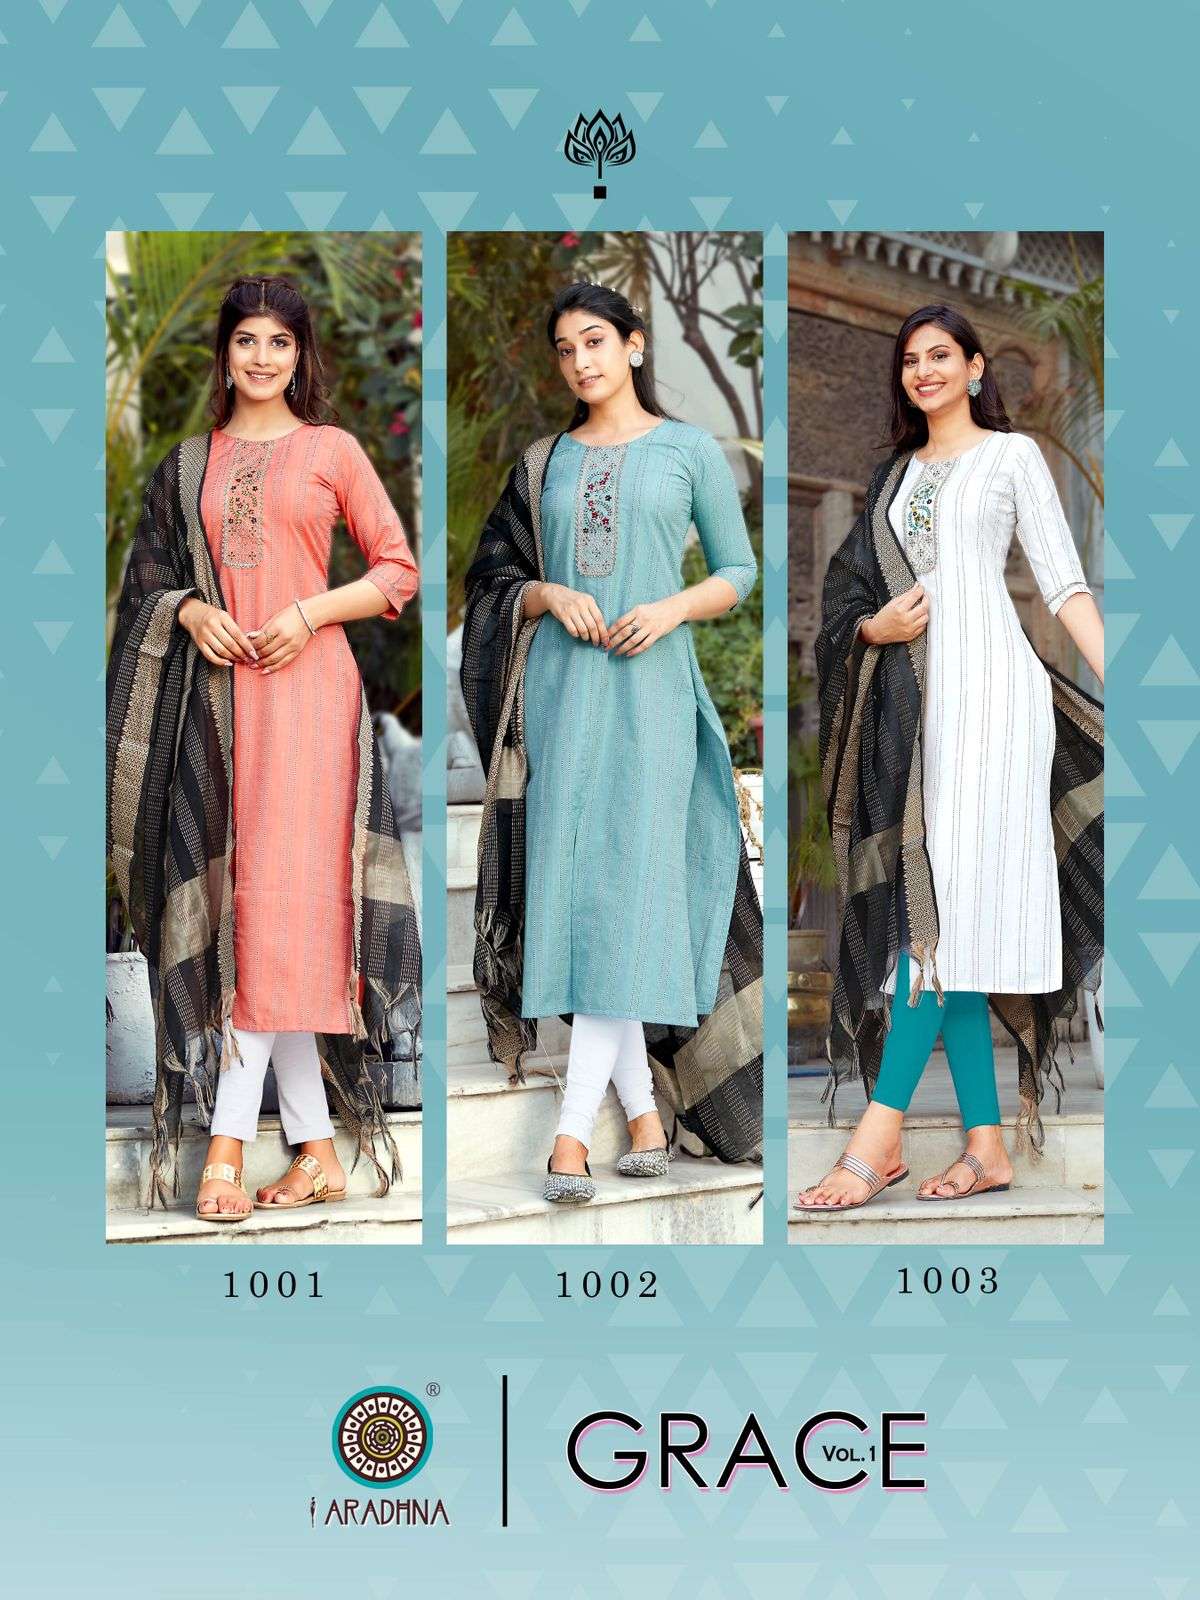 ARADHNA FASHION PRESENTS GRACE 1 WEAVE COTTON WITH EMBROIDERY WHOLESALE KURTI WITH DUPATTA